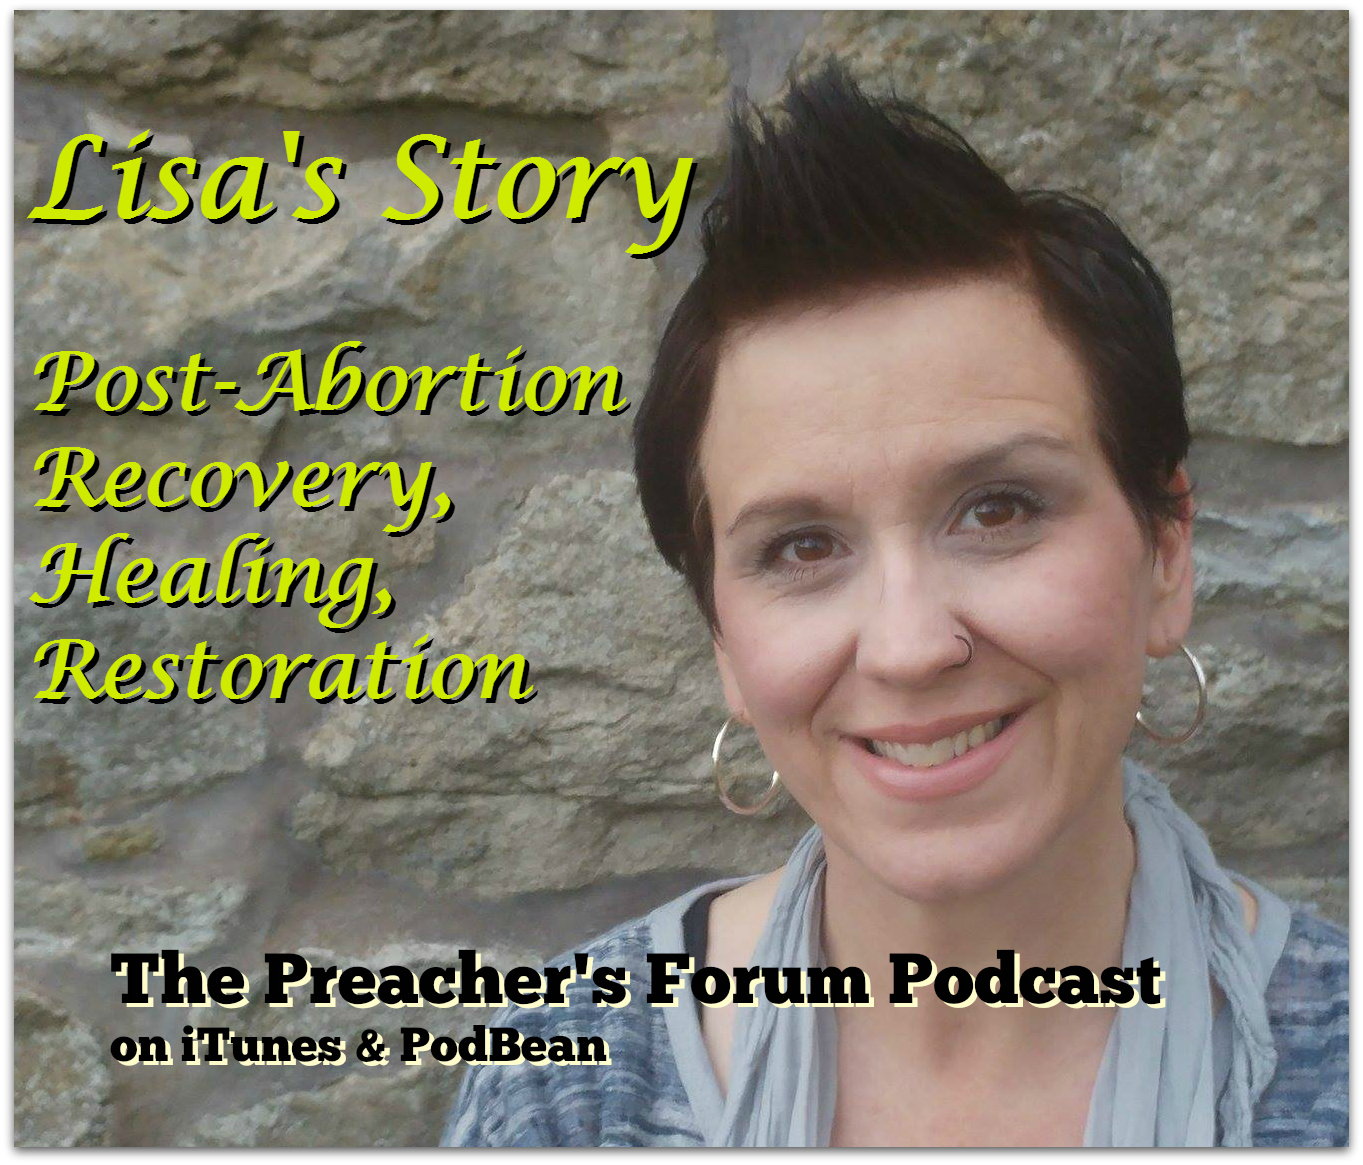 Show 17: Lisa's Story: Post-Abortion Recovery, Healing, and Restoration